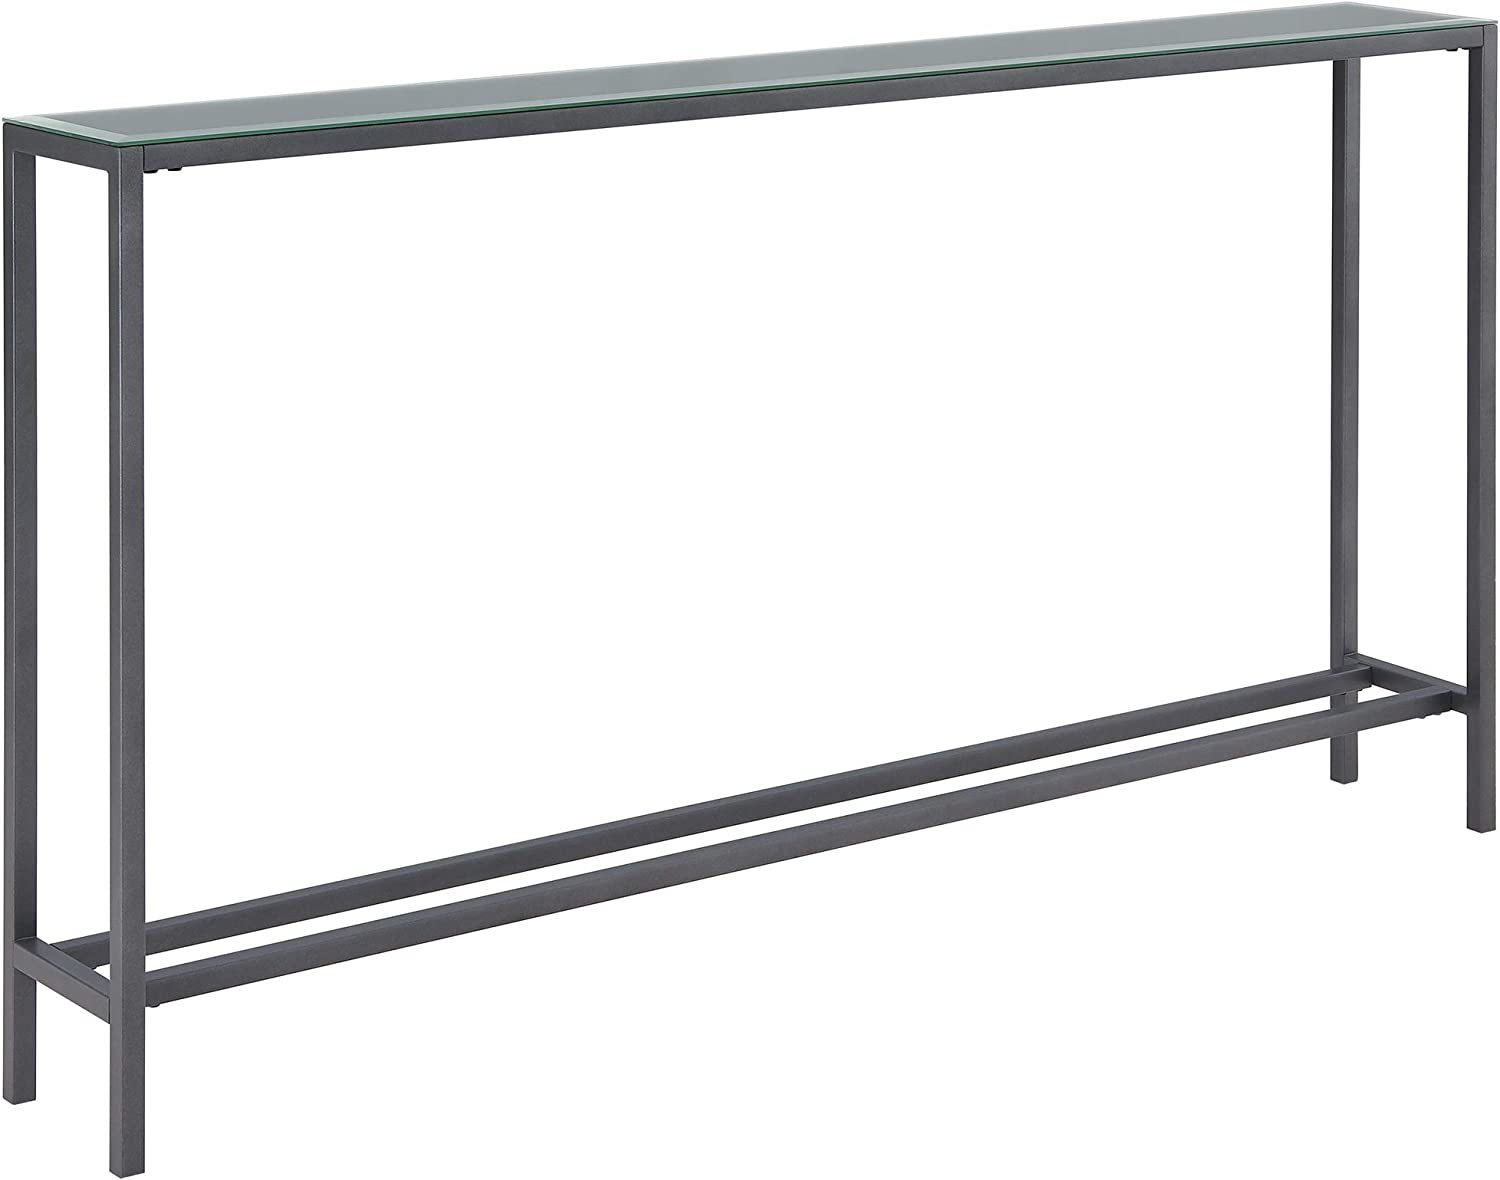 The Gray Darrin Console Table From Southern Enterprises. - $176.96